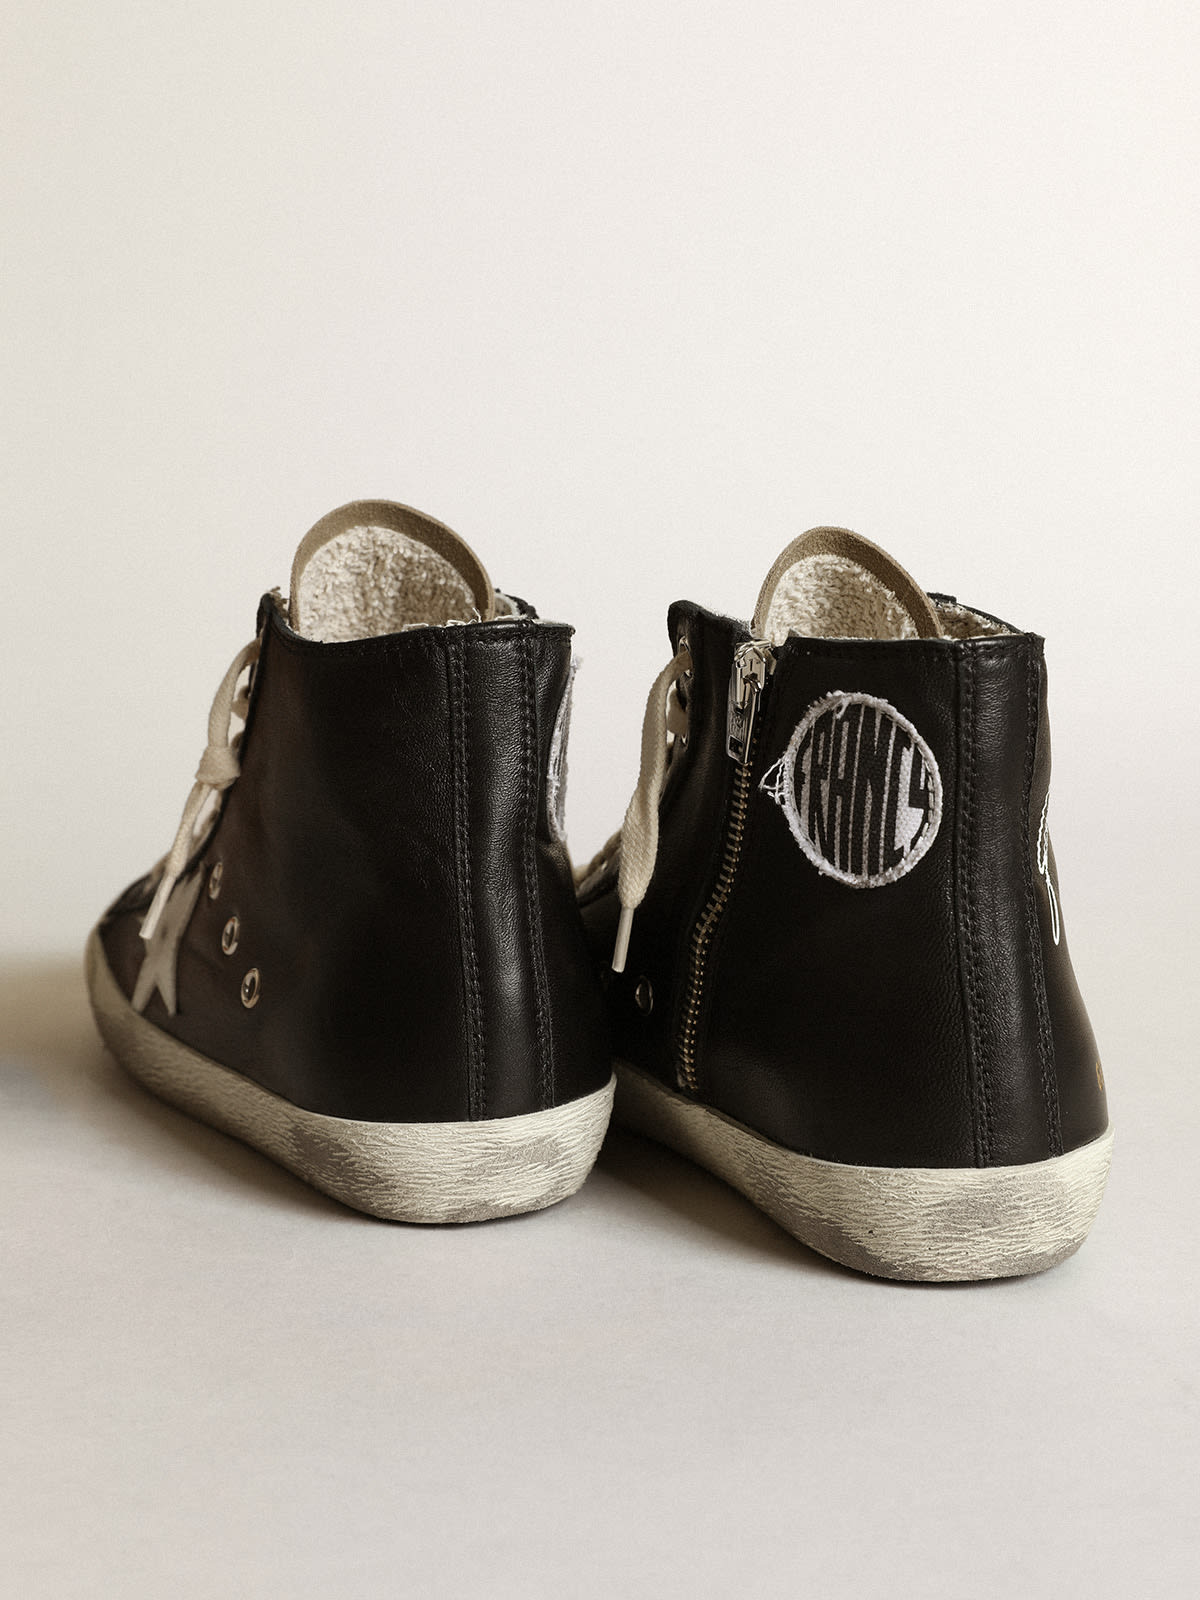 Golden Goose - Women's Francy in black nappa with white leather star in 